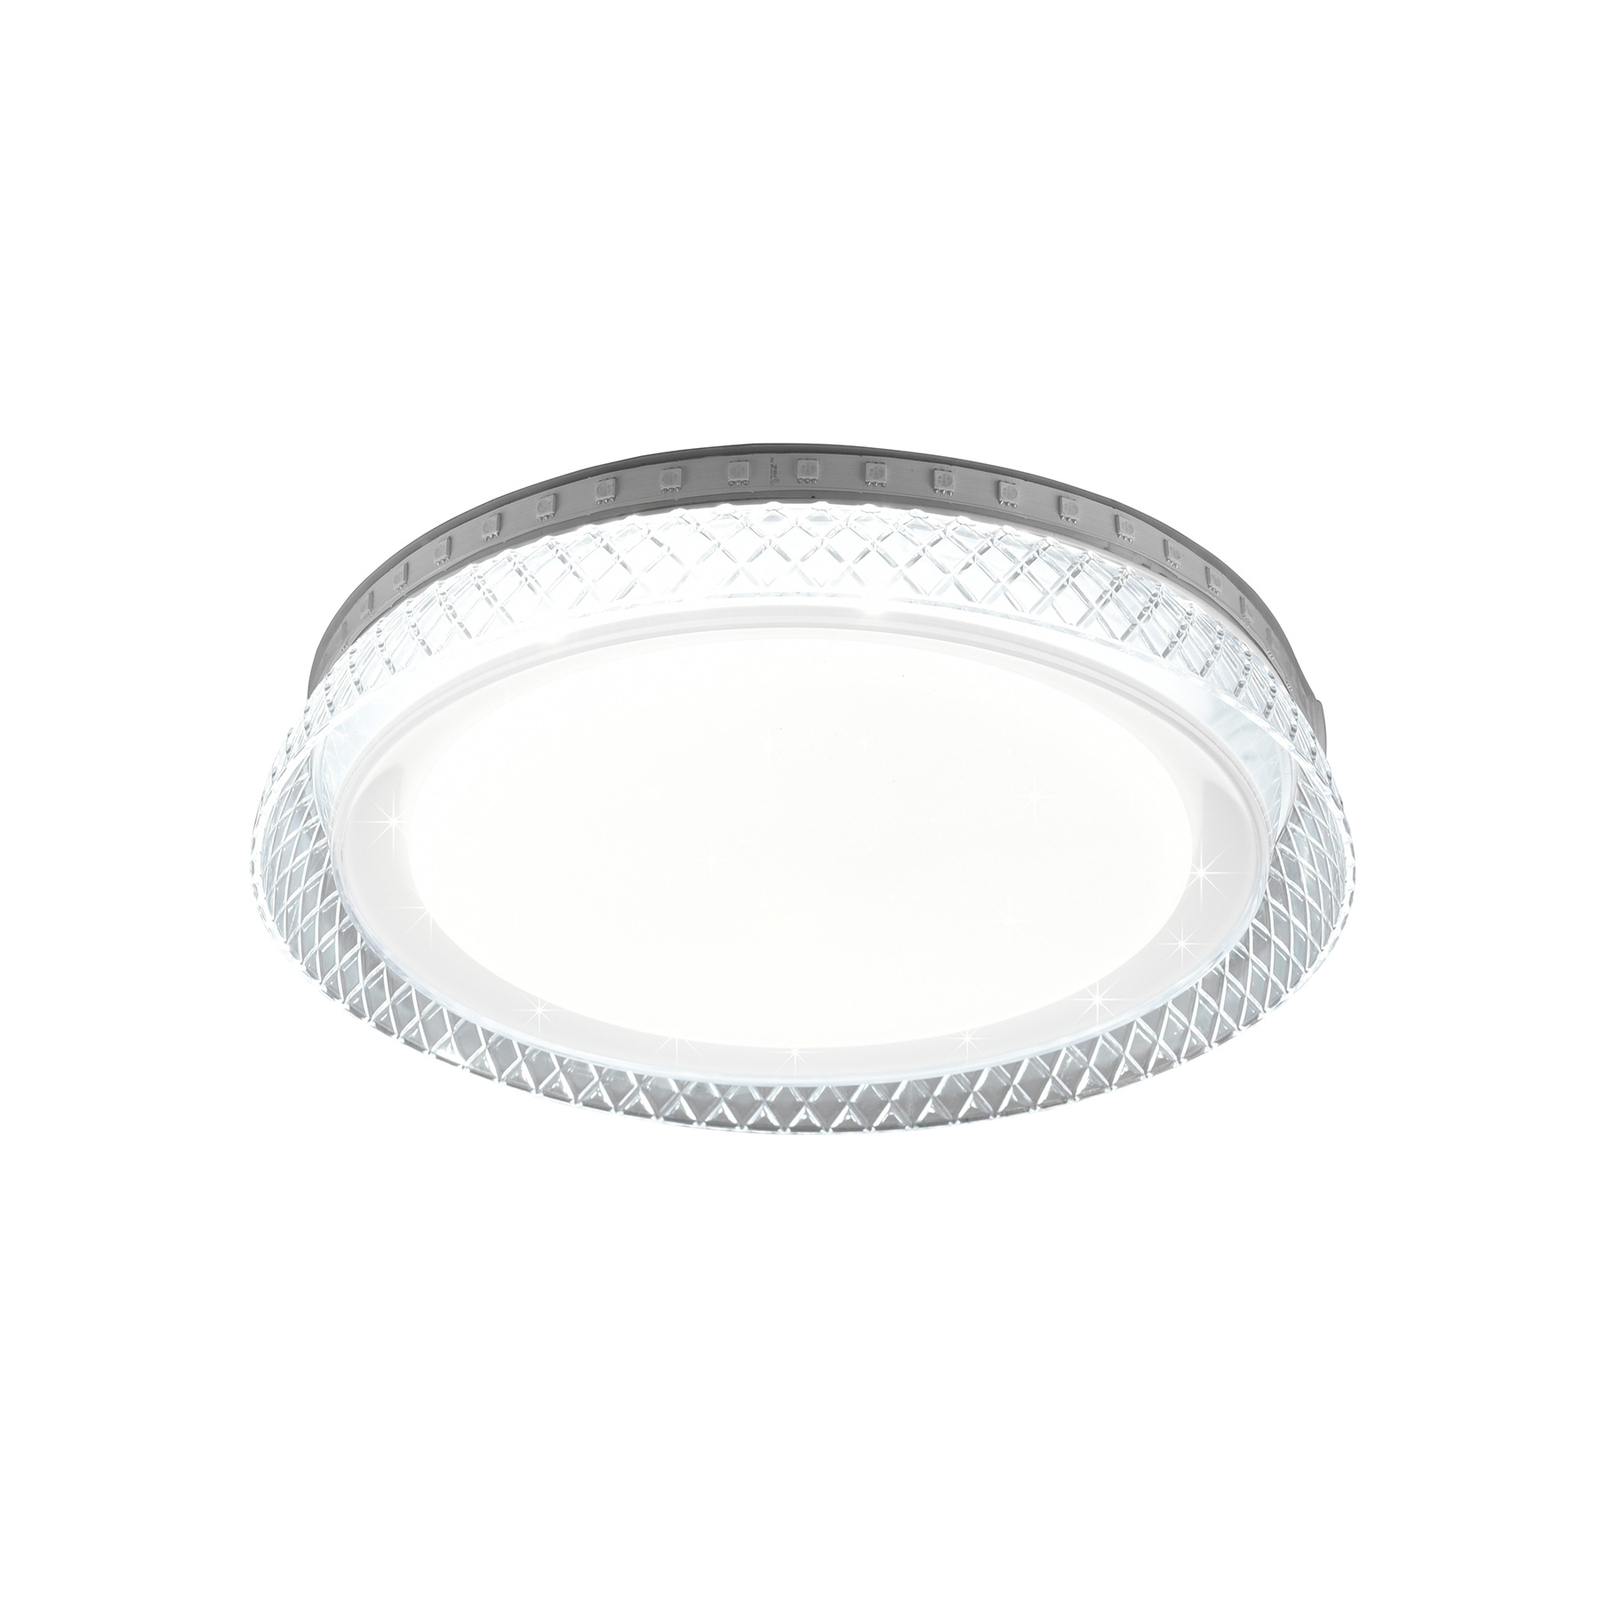 Thea LED ceiling light, RGB, CCT, dimmable